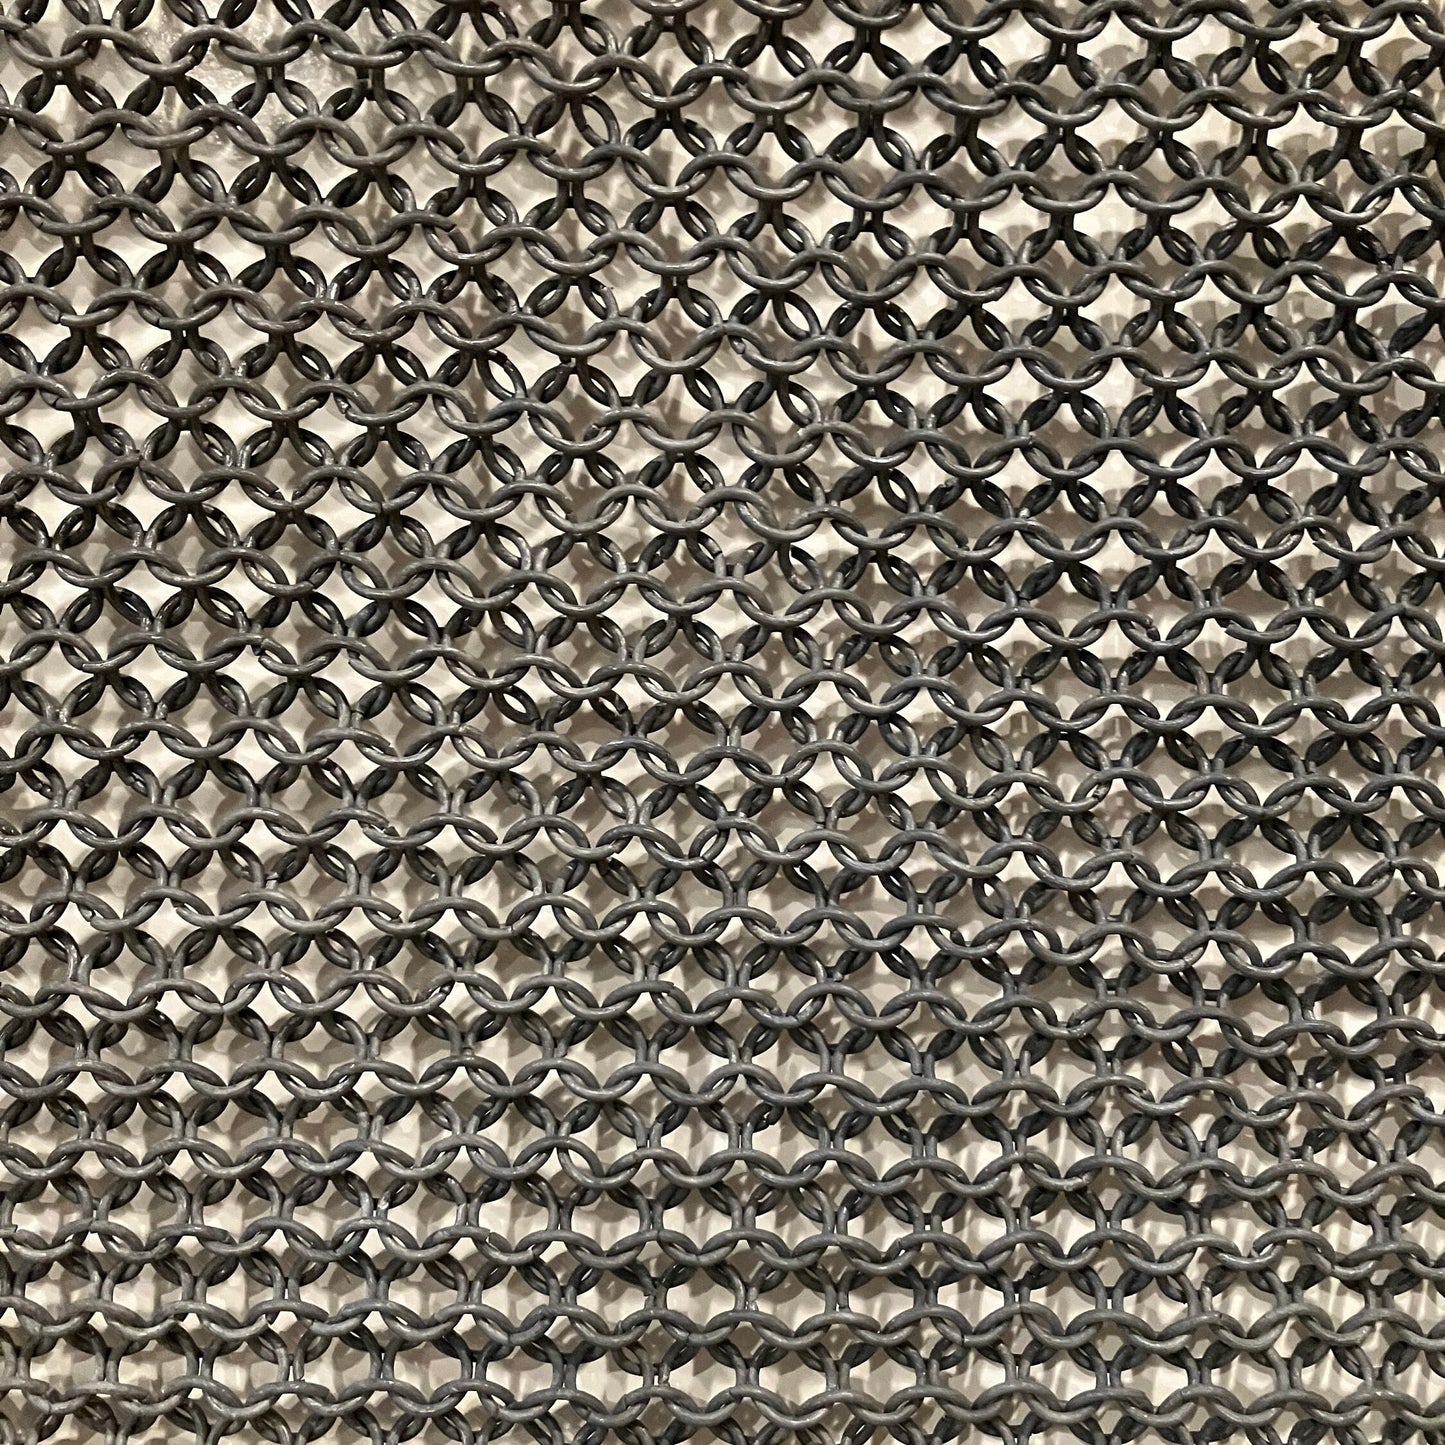 Blackened Aluminum Chainmaille Fabric Squares for Armor and Cosplay